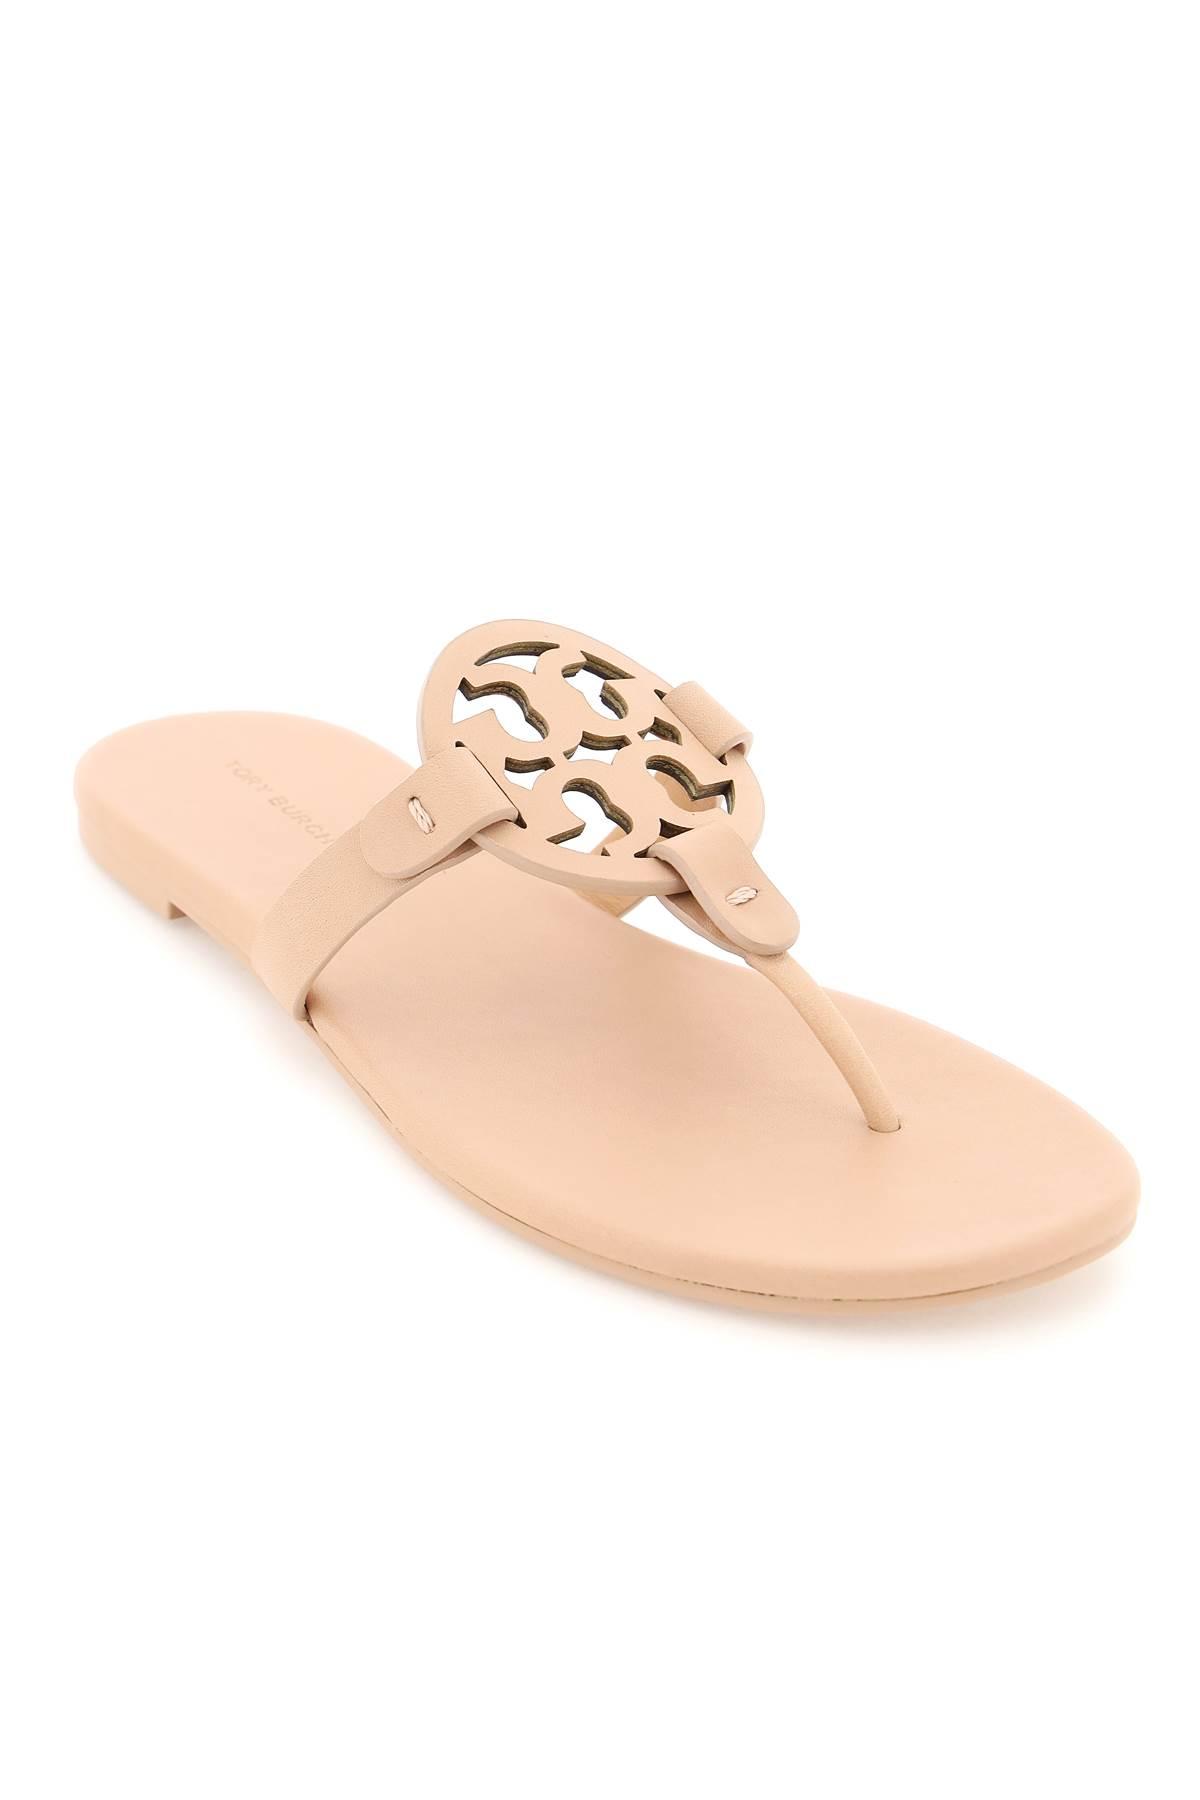 Tory Burch Miller Thong in Pink | Lyst UK